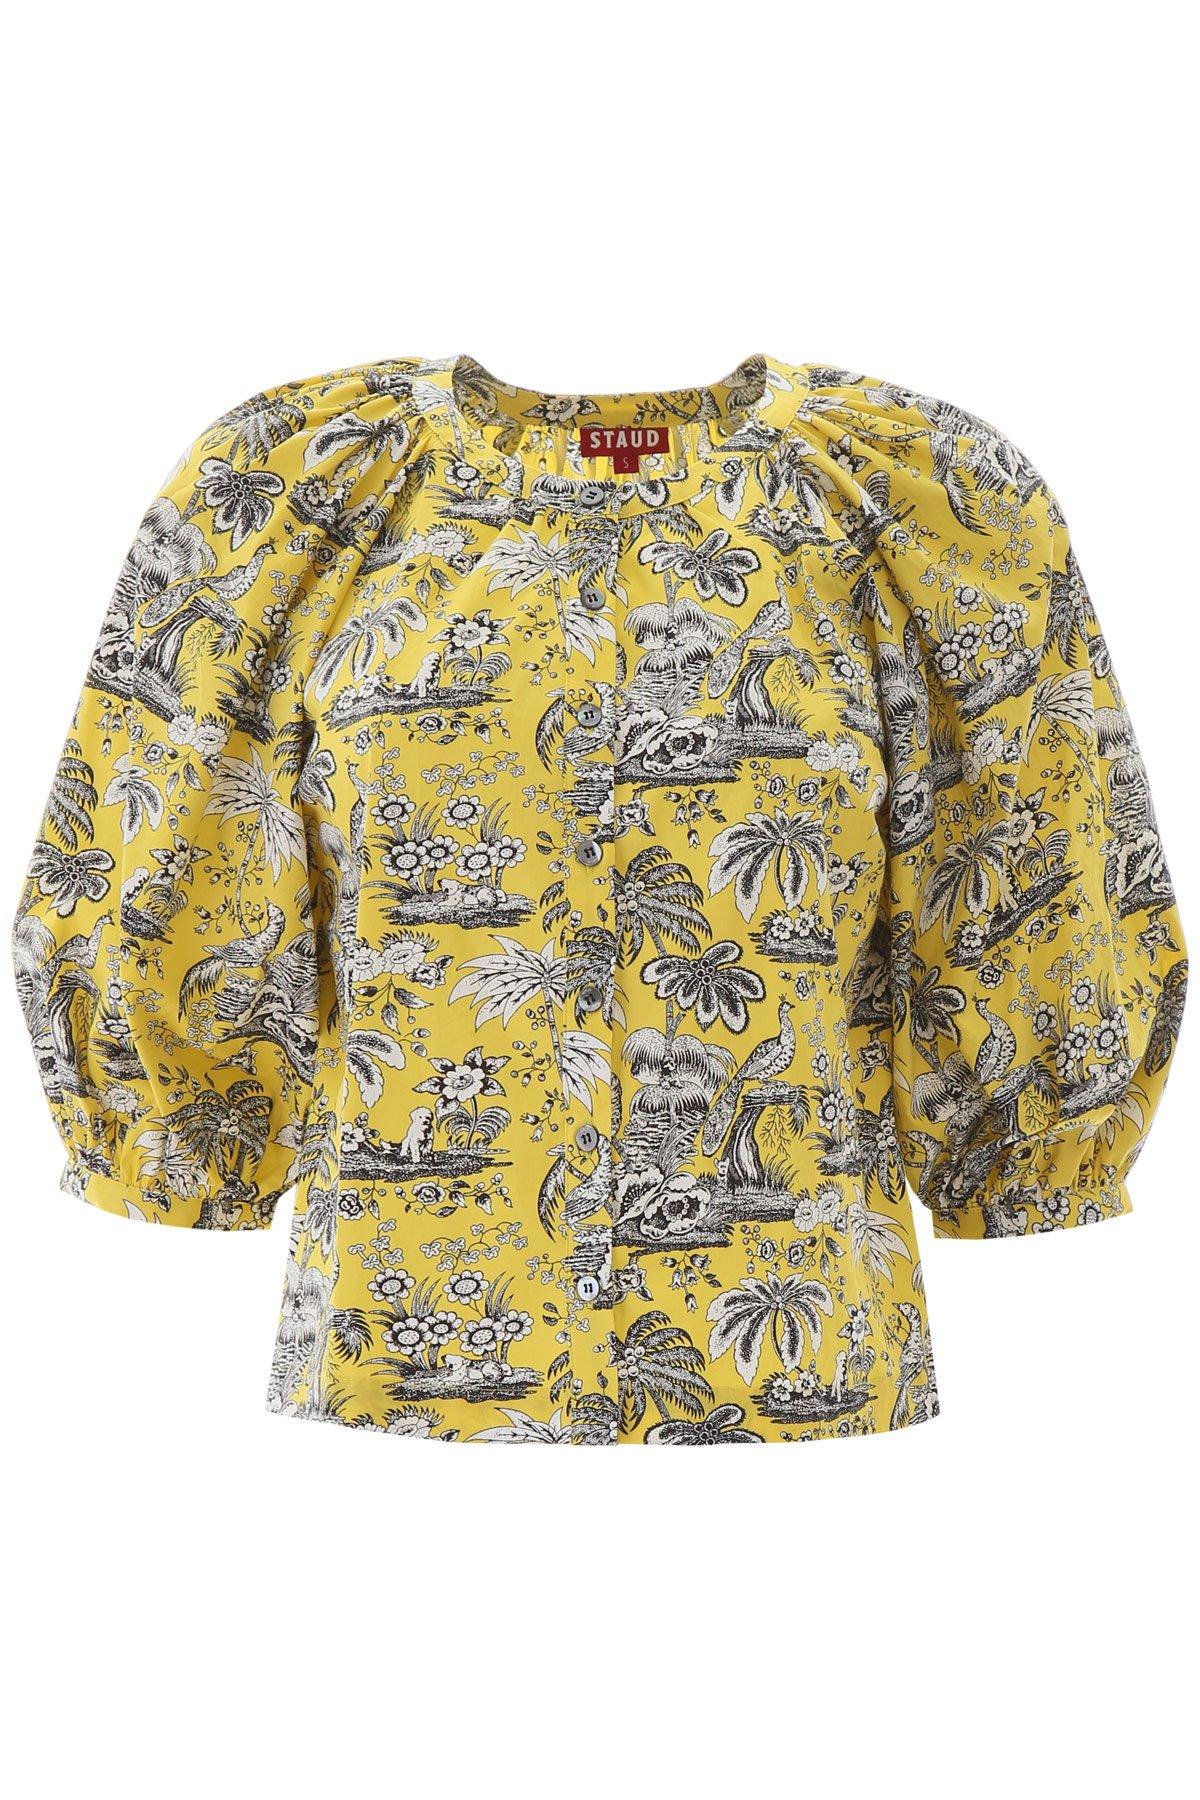 STAUD Cotton Toile Printed Top in Yellow - Save 8% - Lyst